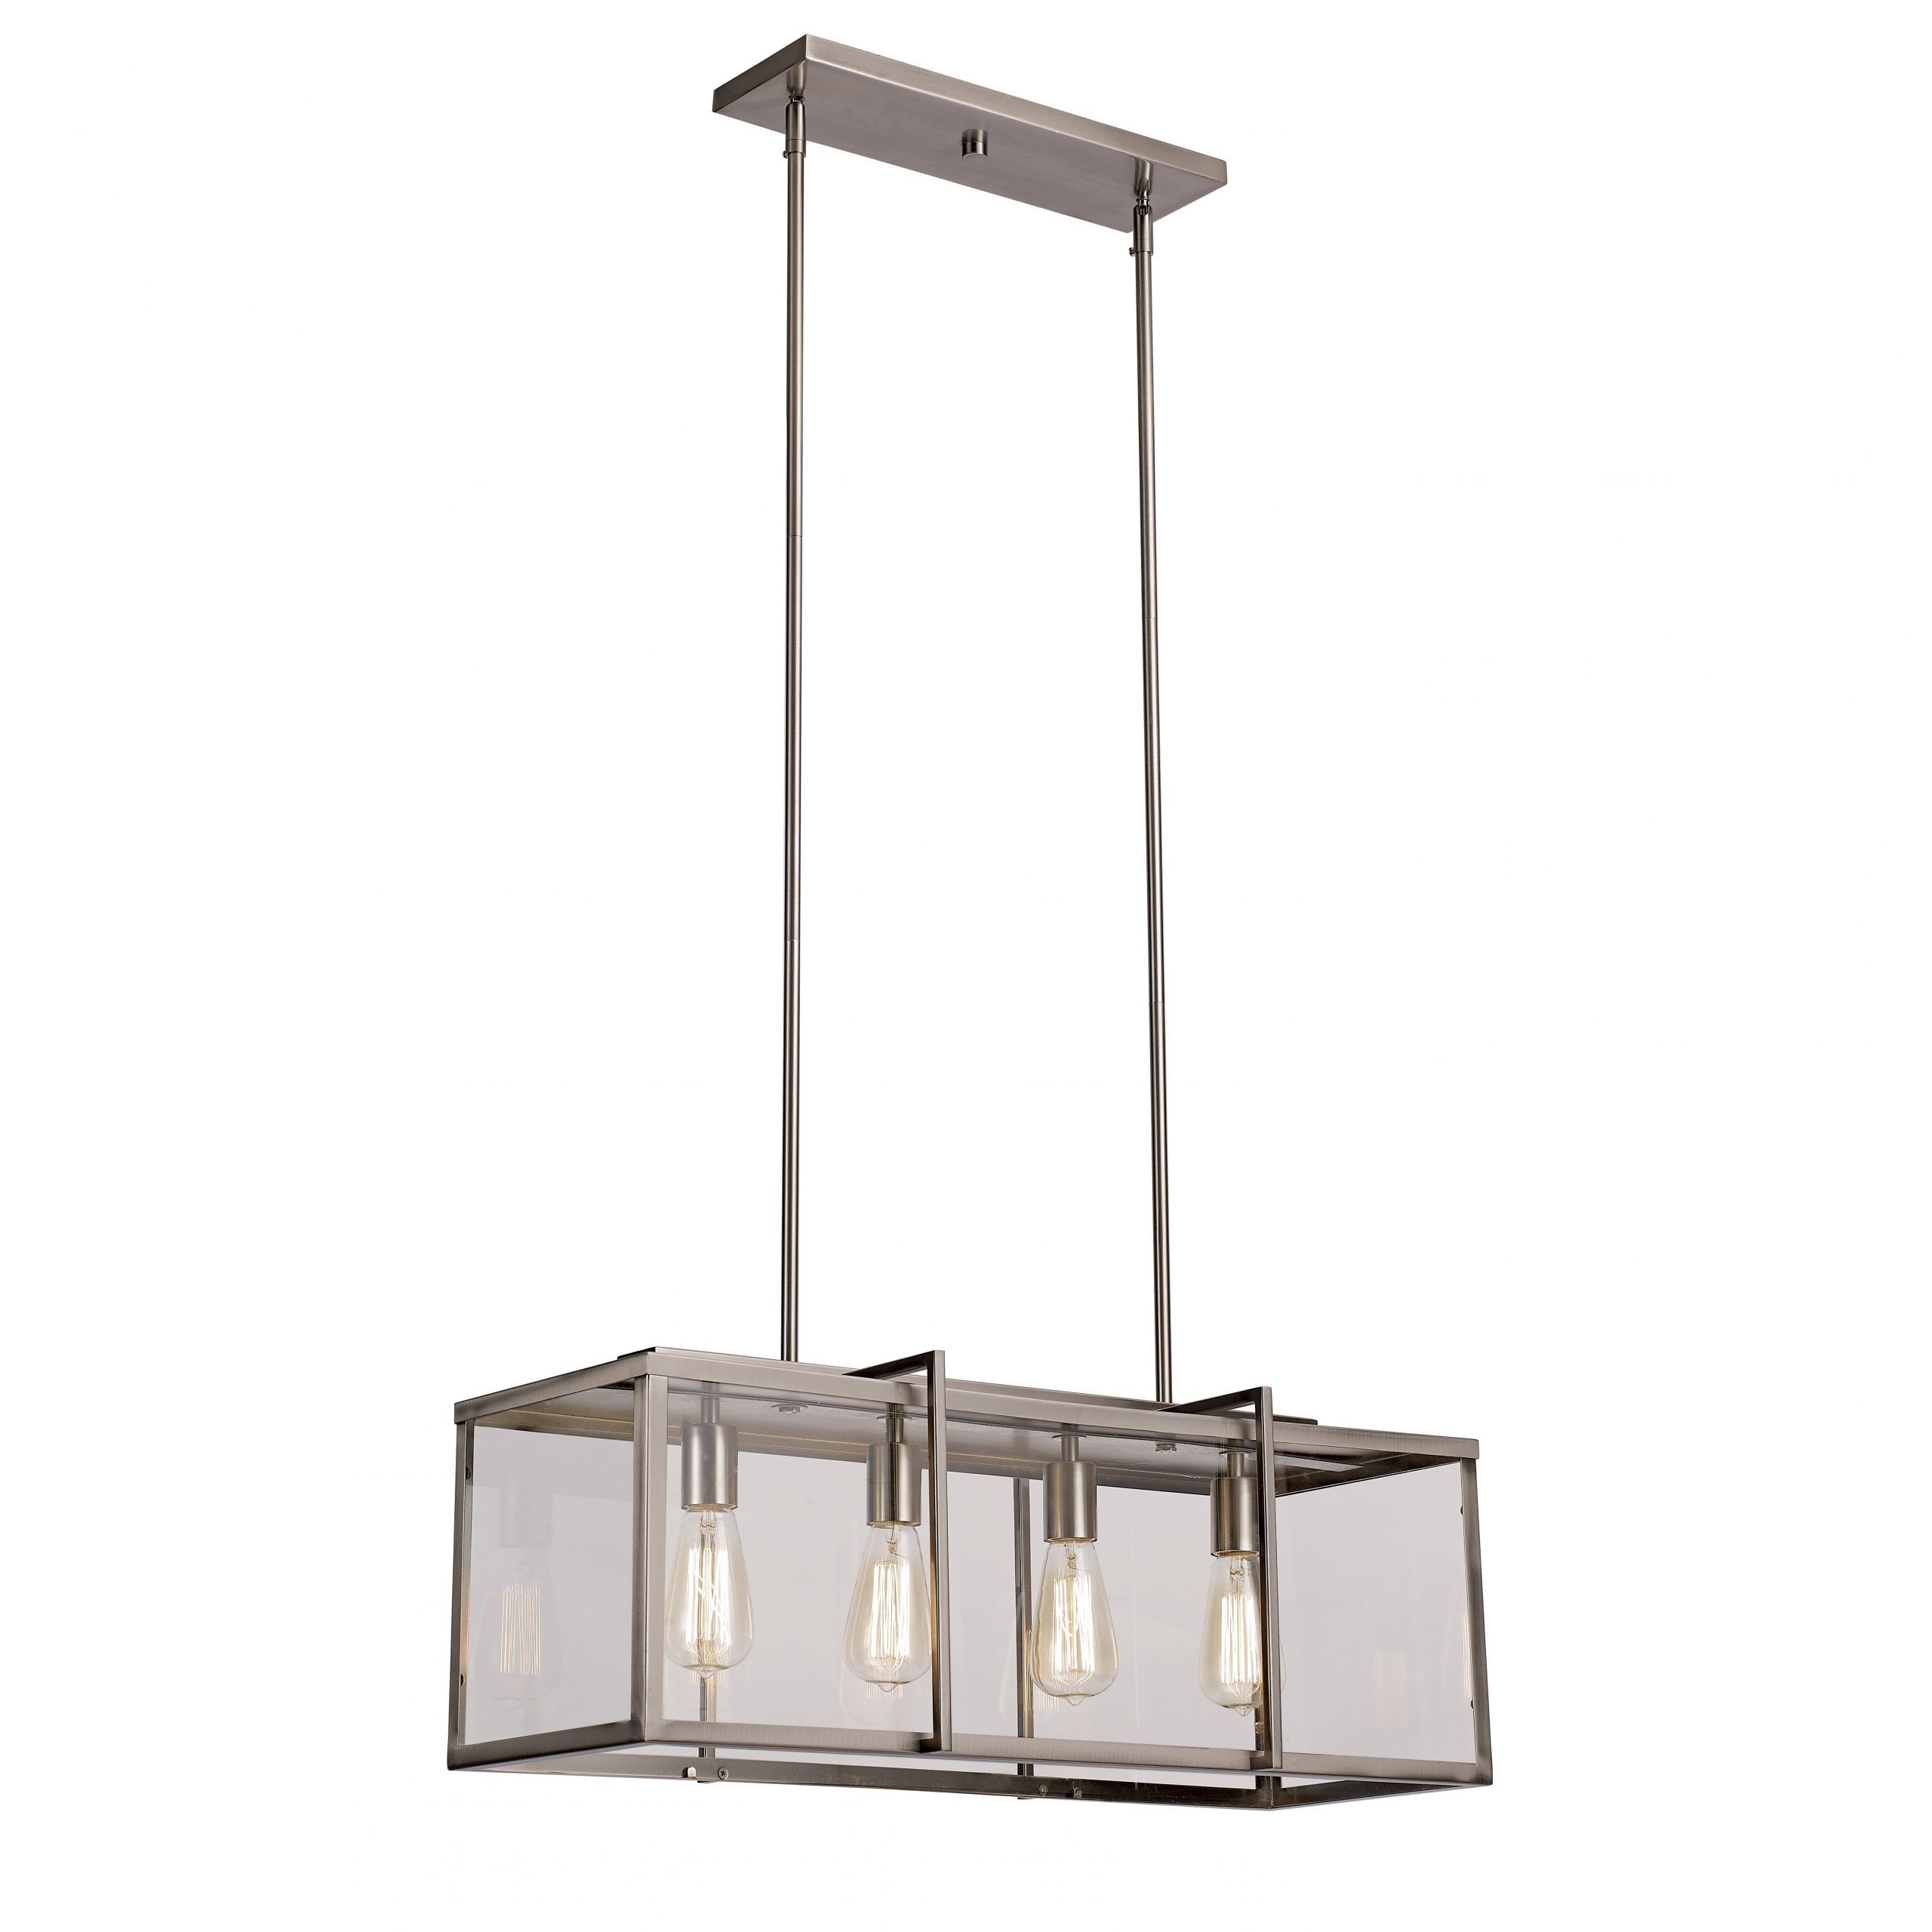 Transglobe Lighting Boxed 4 Light Kitchen Island Pendant For Preferred Gray And Nickel Kitchen Island Light Pendants Lights (View 7 of 15)